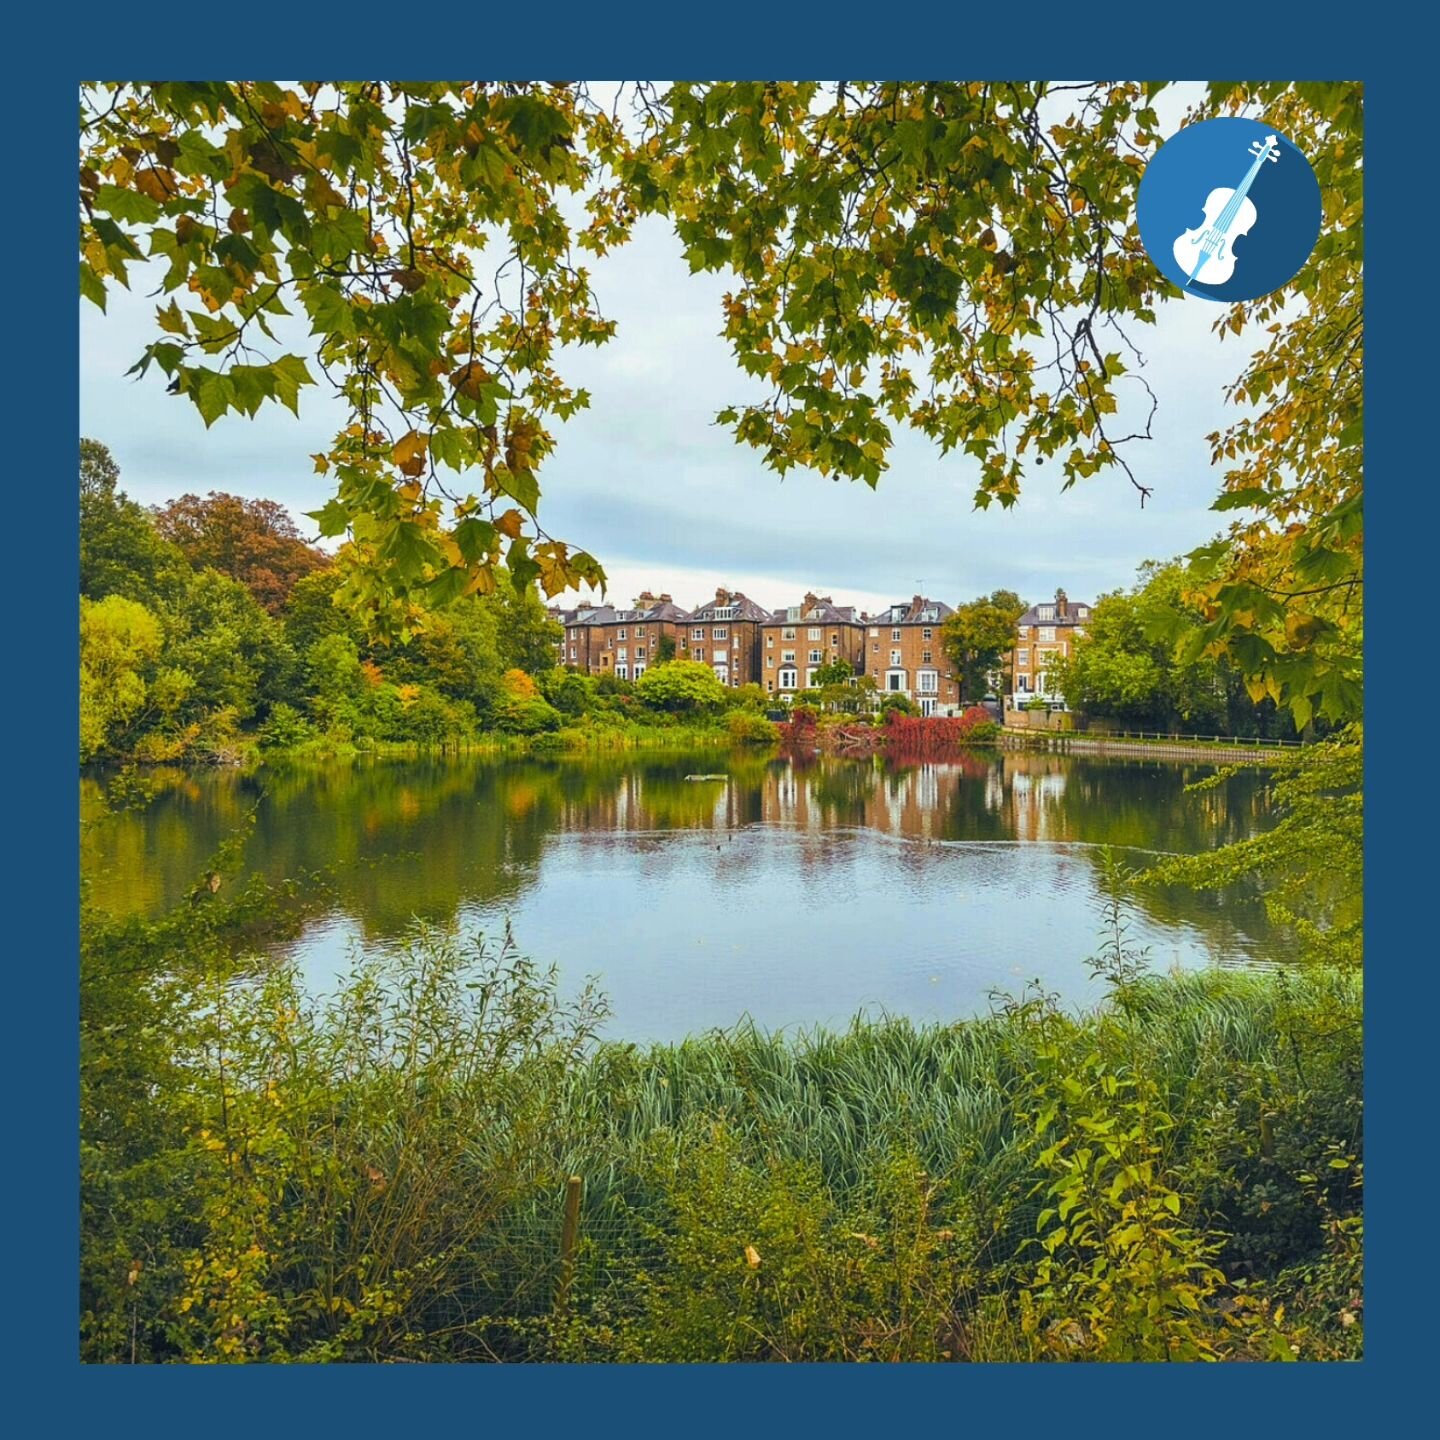 Elgar and Hampstead

Hampstead Heath, with its tranquil landscapes and peaceful ambiance, was the backdrop to many of Elgar's creative moments. His walks through the heath, gazing at the Highgate Ponds, fueled his fascination with nature, influencing